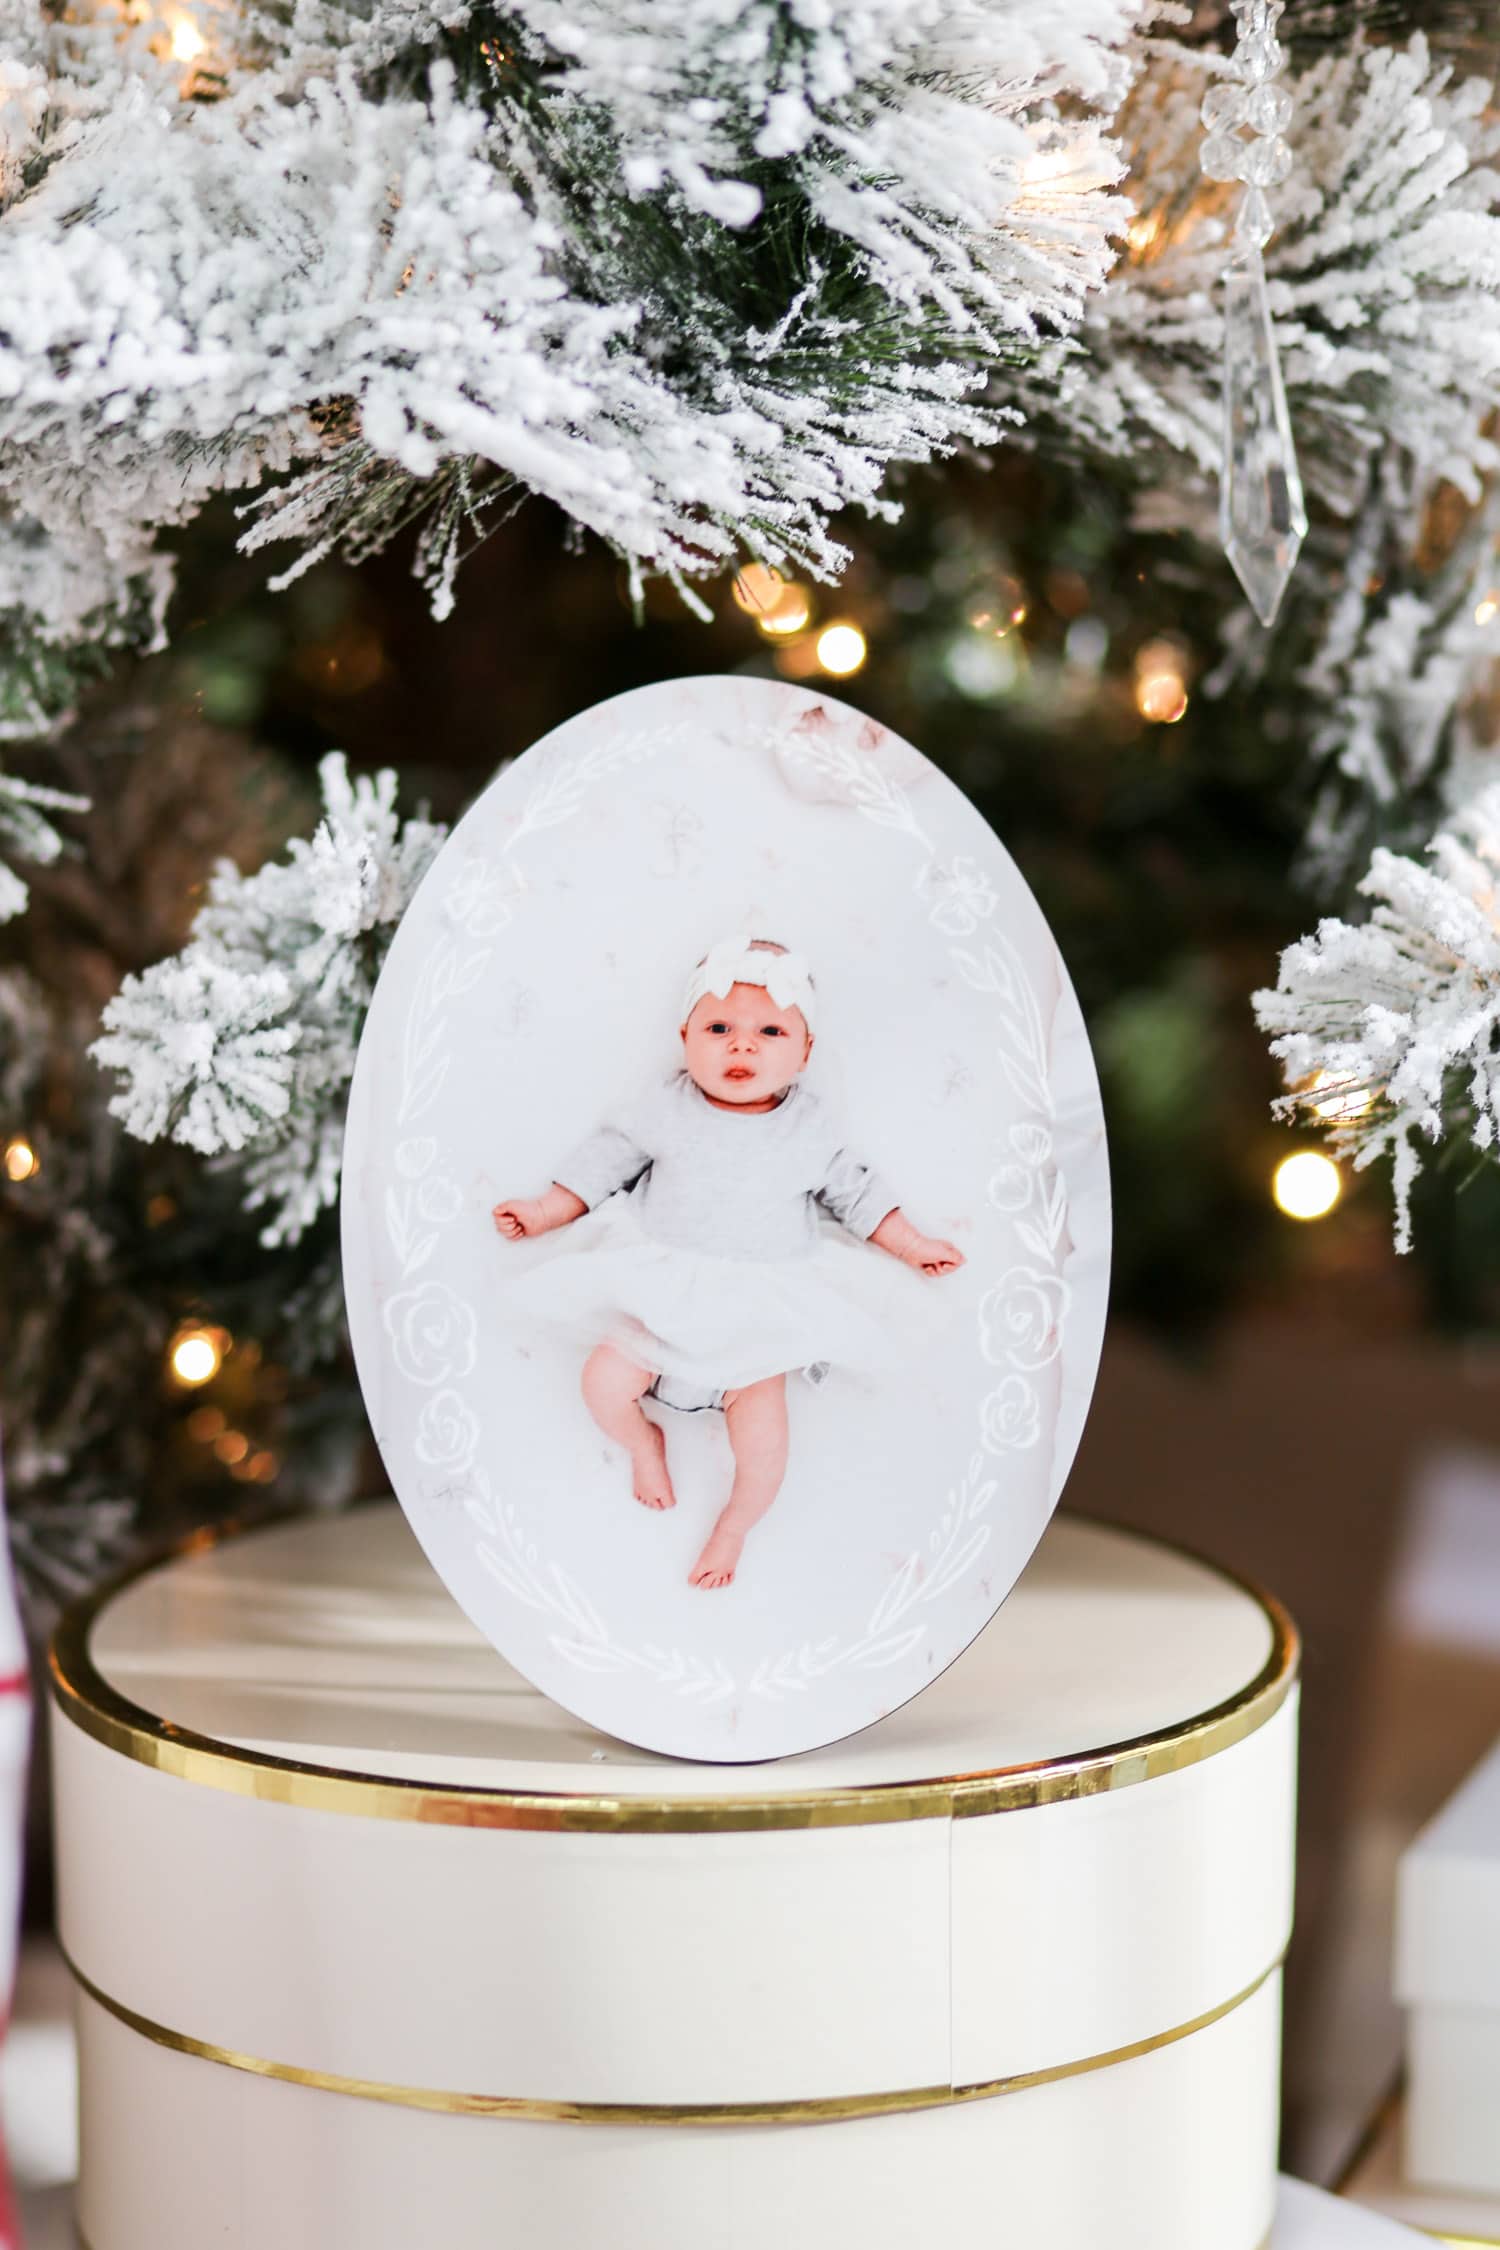 Personalized Christmas gifts | Baby's first Christmas | Newborn baby | Christmas gift Ideas shutterfly gifts | Christmas Ideas | Ashley Brooke Nicholas beauty blogger